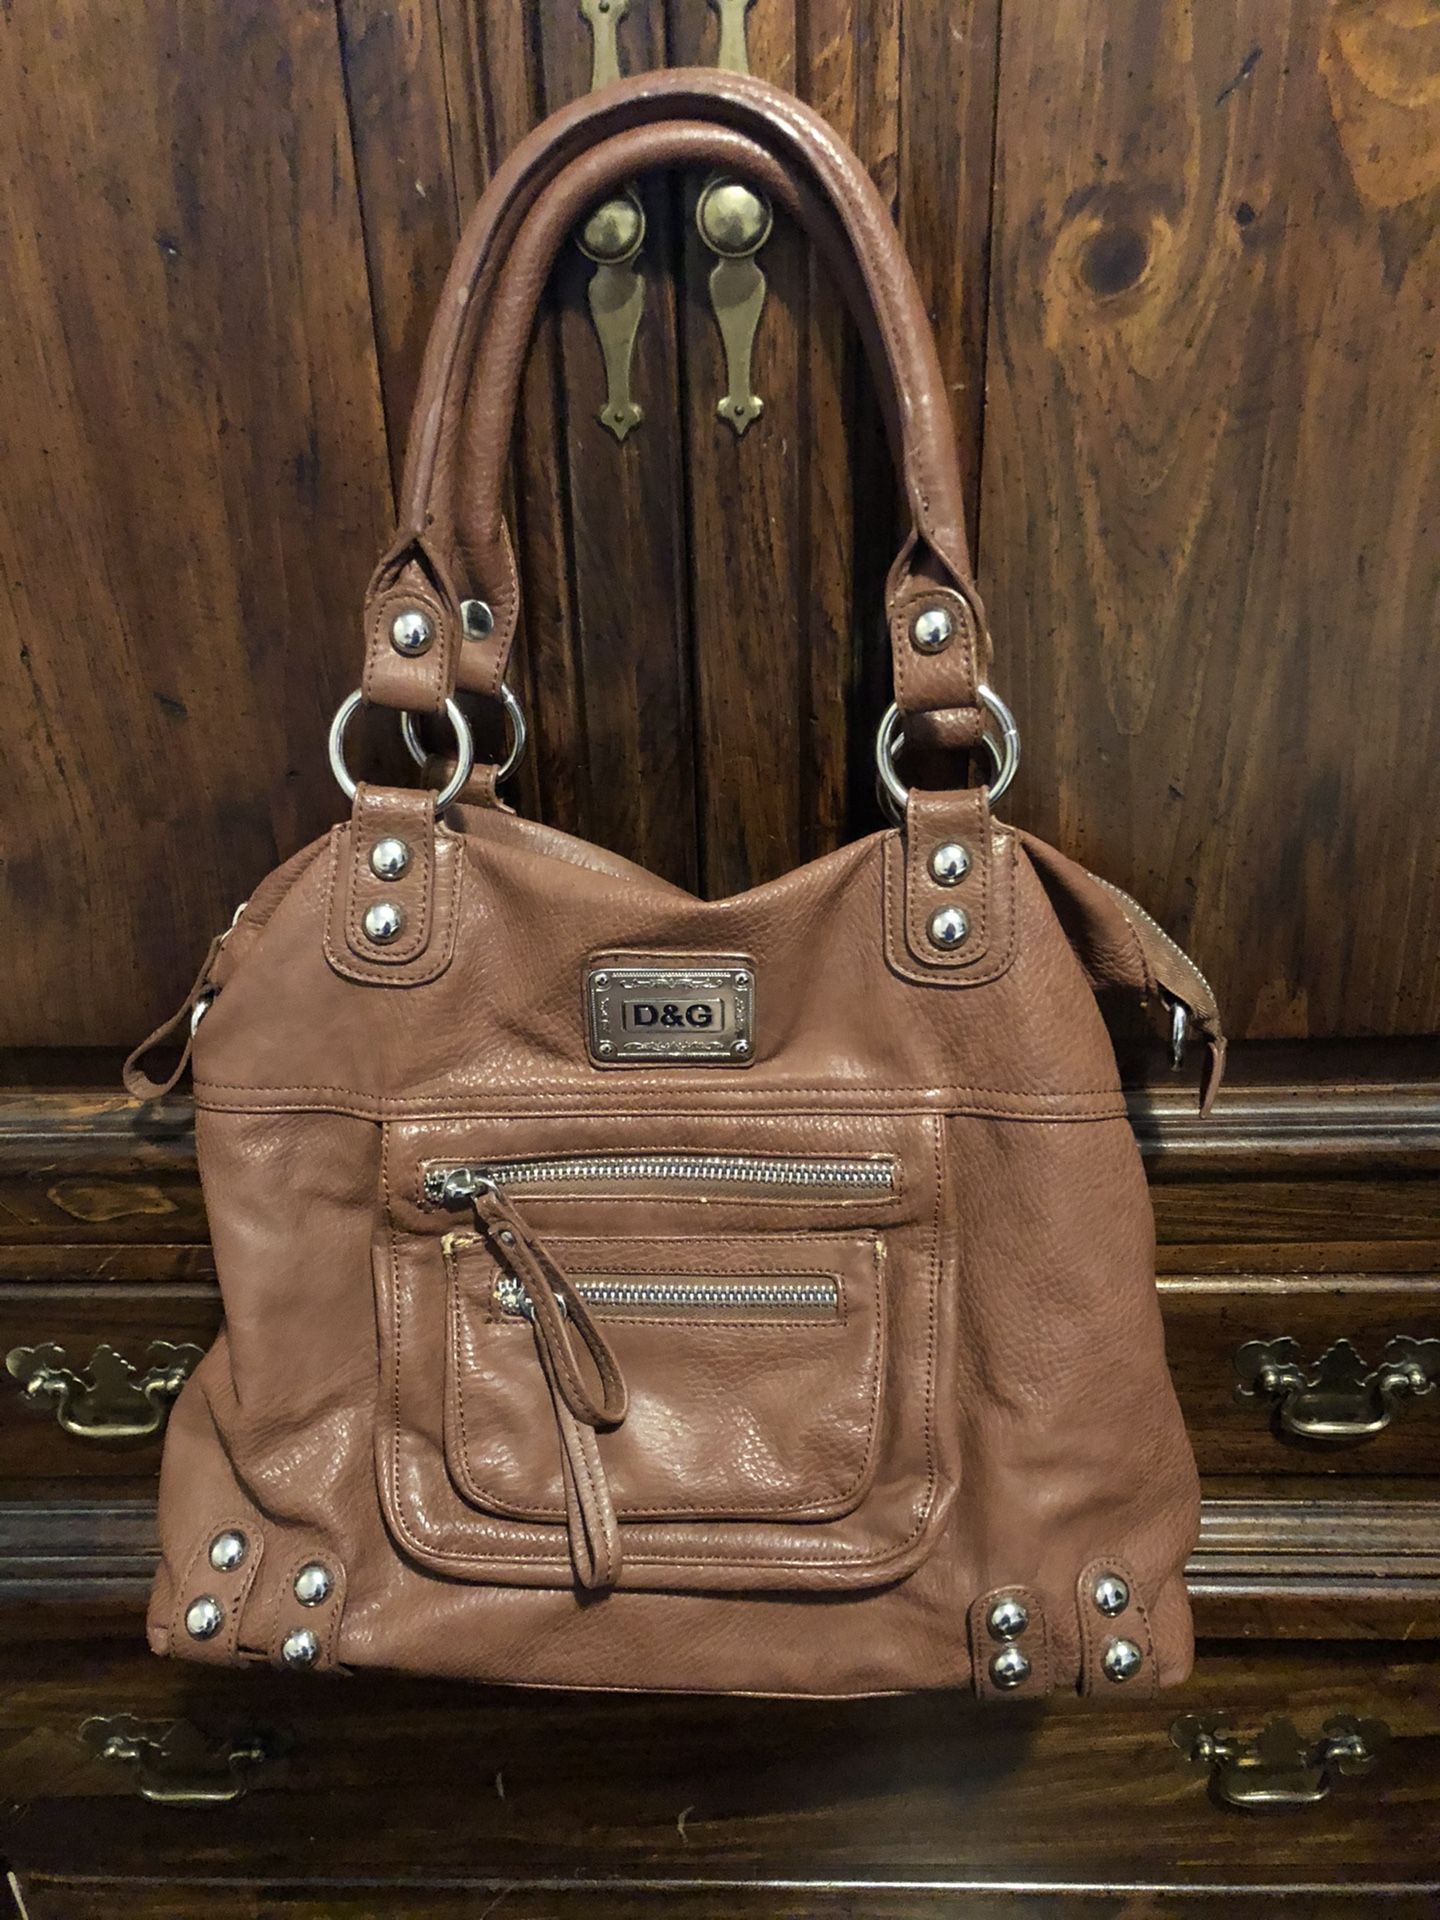 Cute brown bag with silver hardware